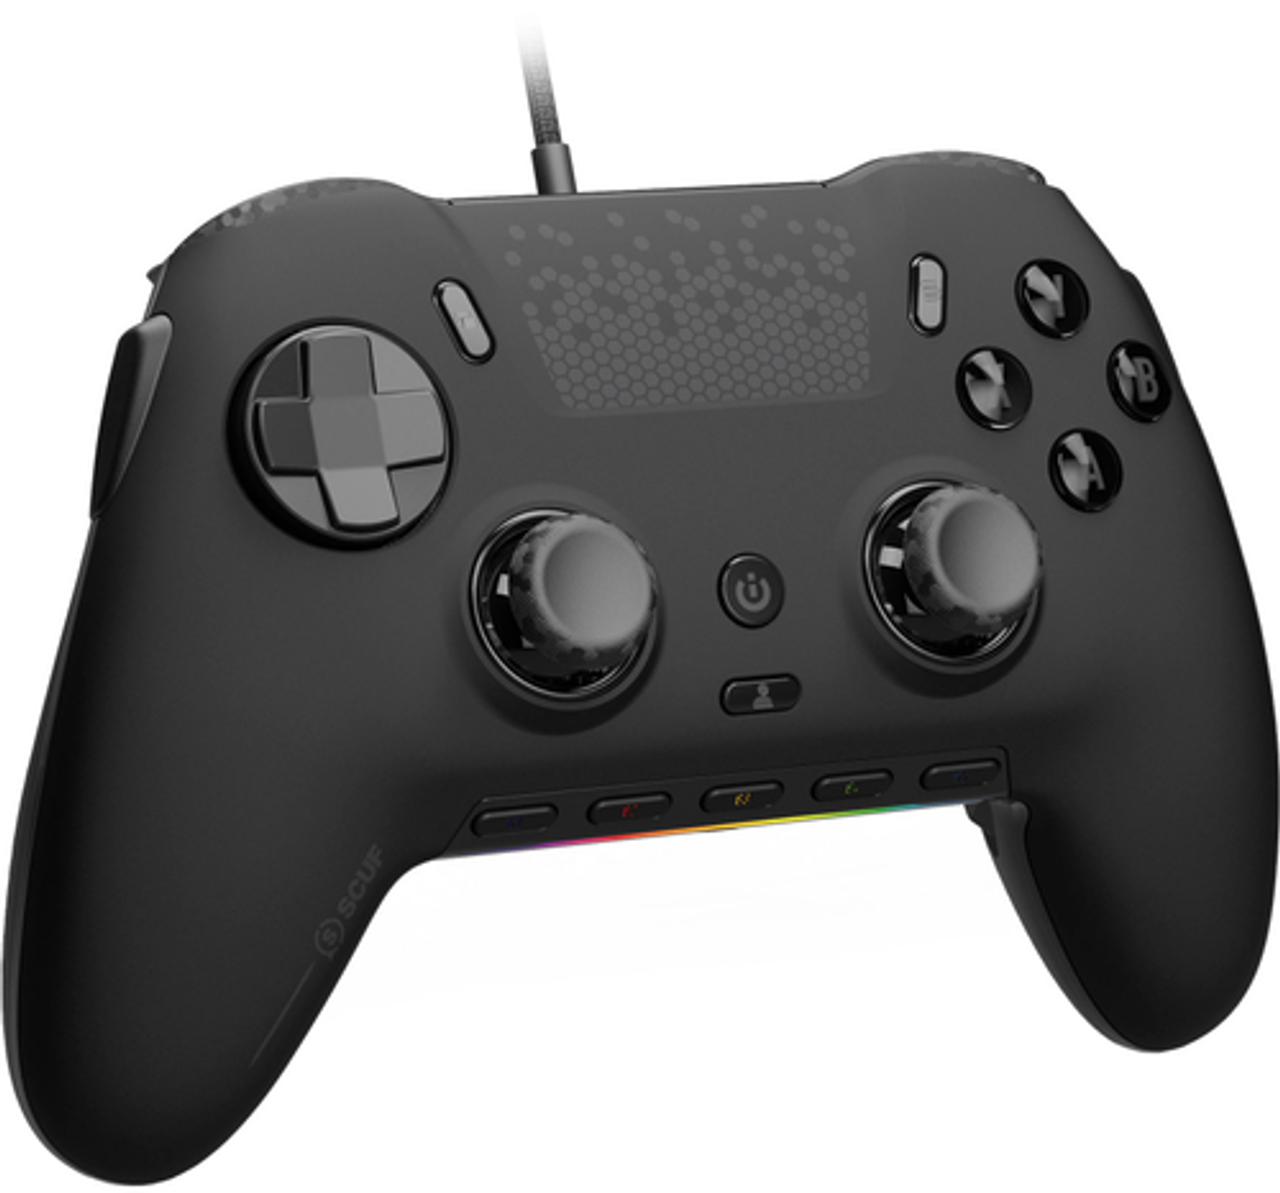 SCUF ENVISION Wired Gaming Controller for PC - Black